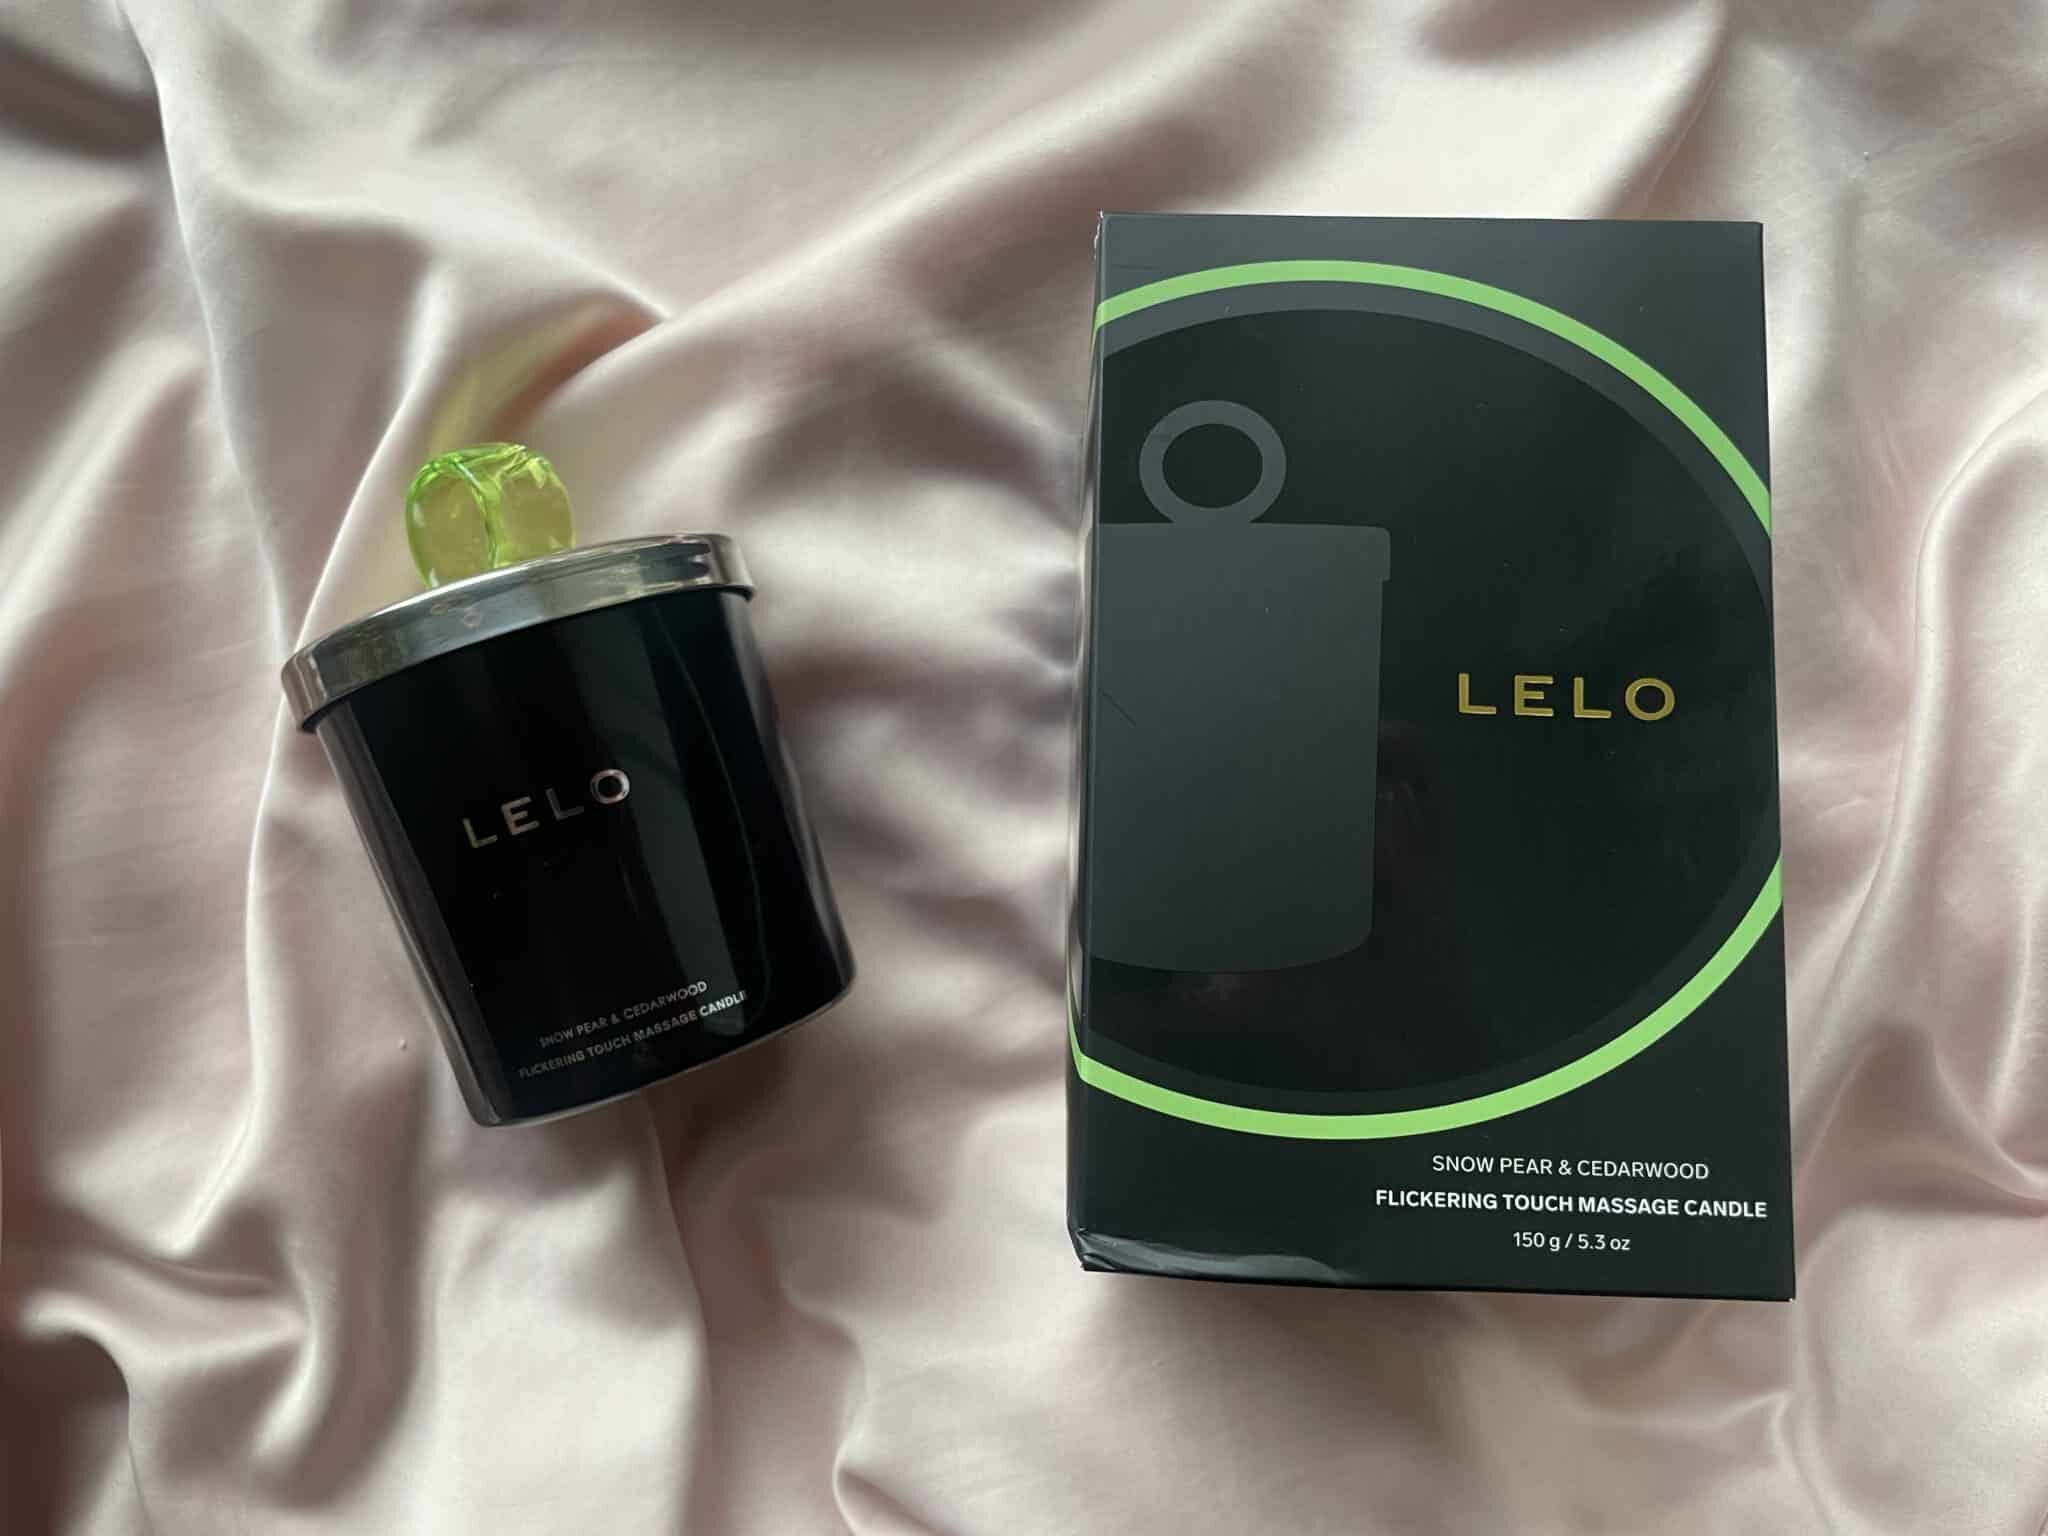 LELO Flickering Touch Massage Candle Unwrapping the LELO Flickering Touch Massage Candle: A Look at the Packaging